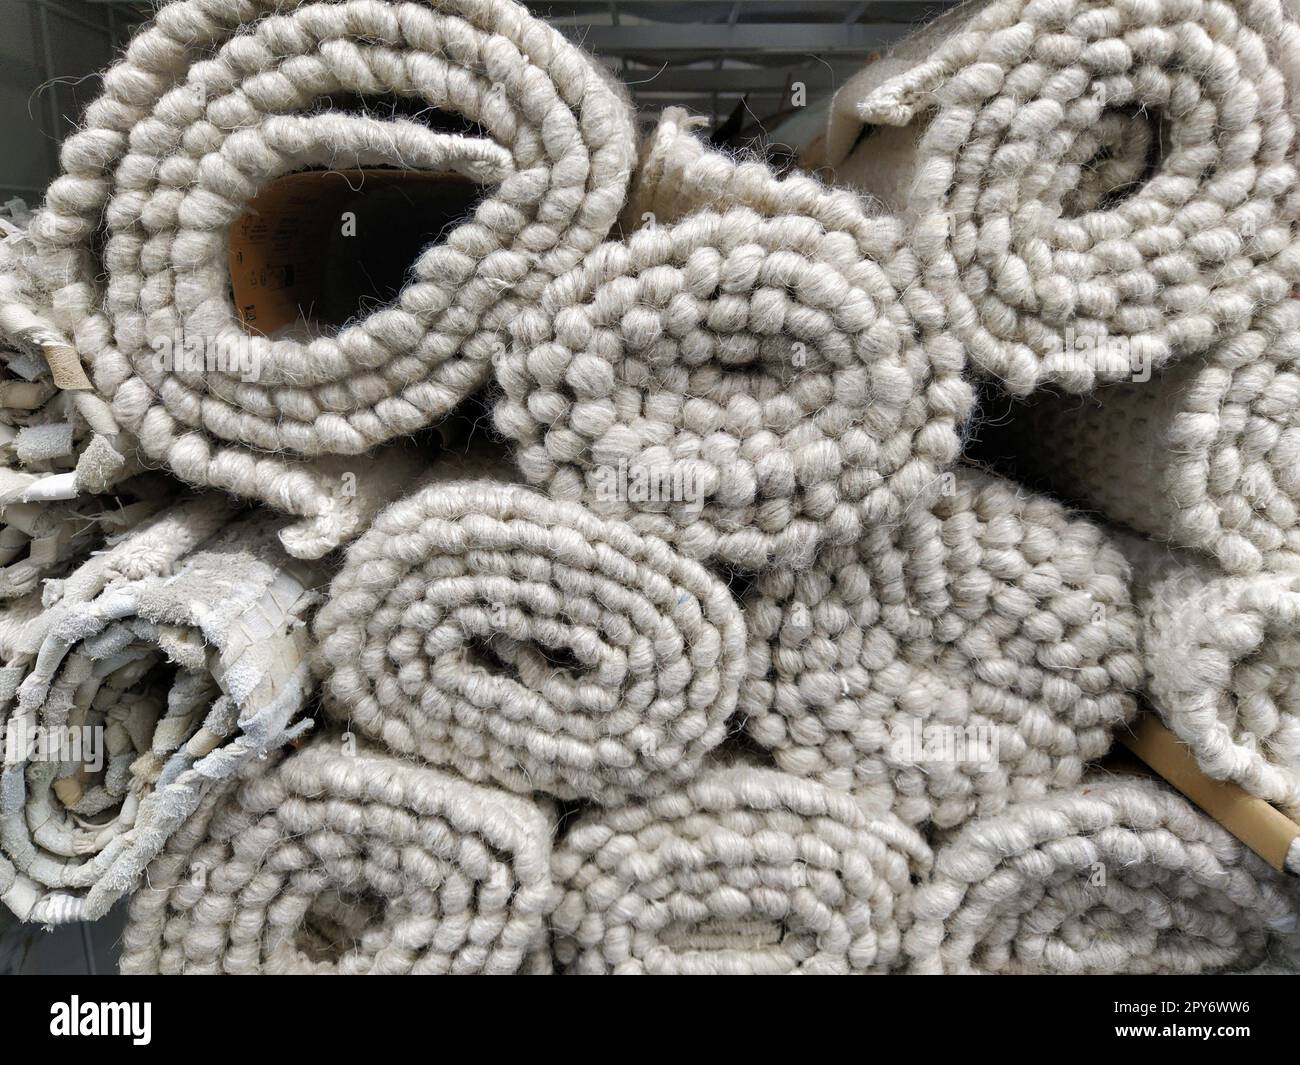 Soft fluffy gray and white rugs folded into skeins, rolls and bundles. An assortment of bedspreads on a store shelf. The blankets are beautifully laid out for sale. Fleecy warm synthetic fabric Stock Photo